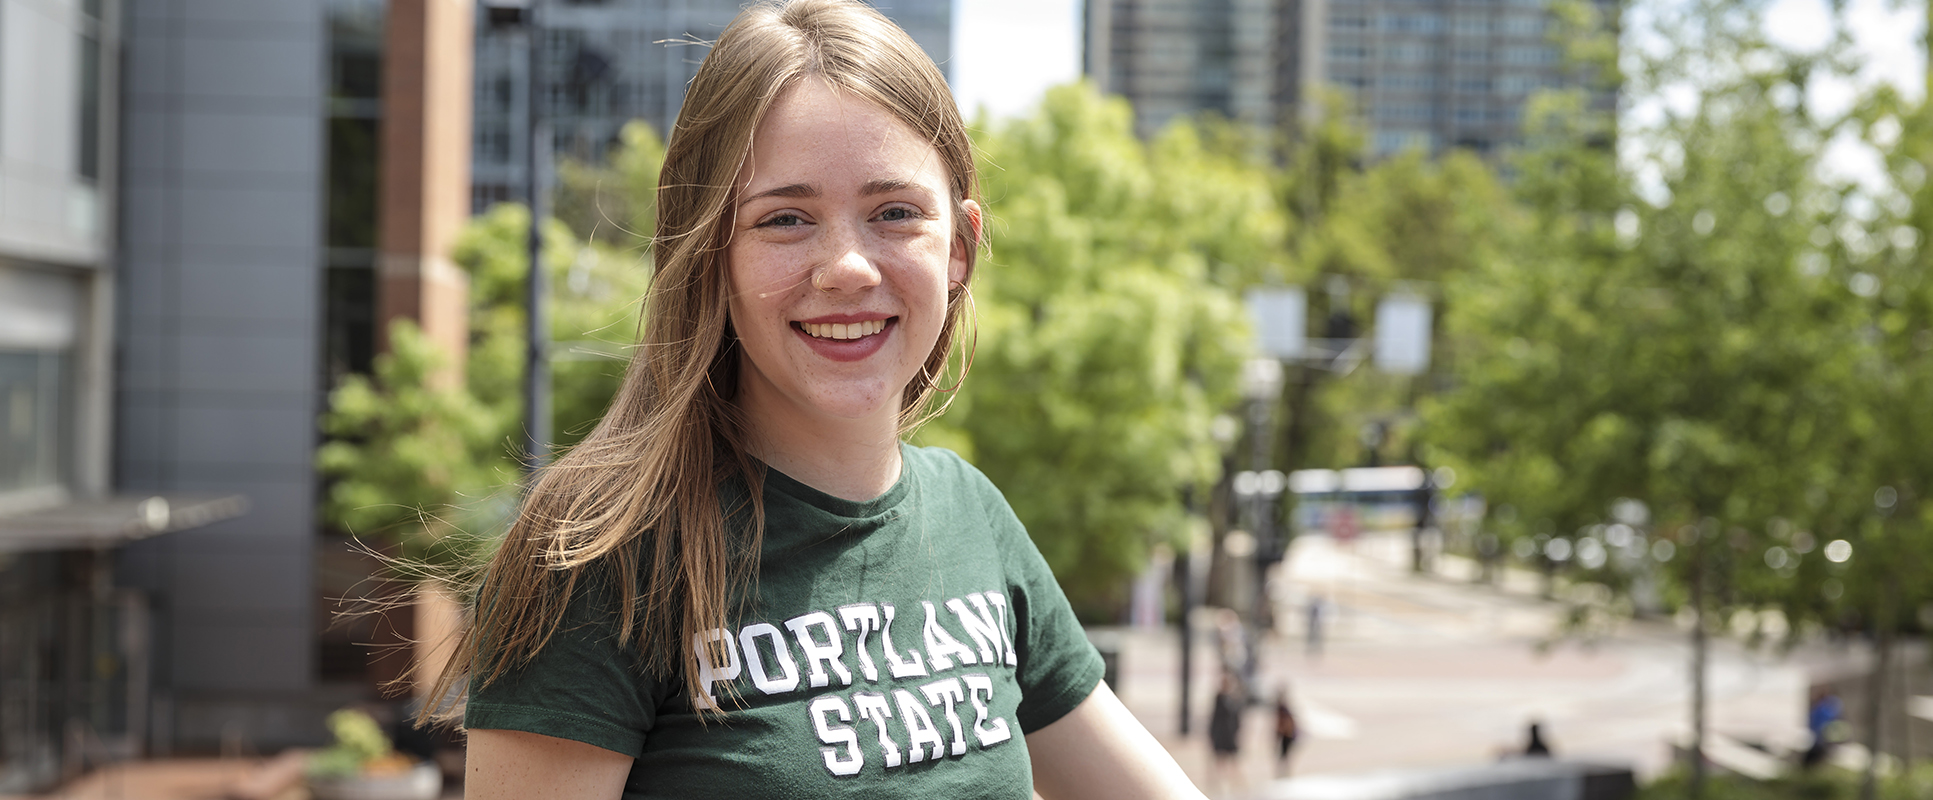 Portland State student relaxing in Urban Plaza